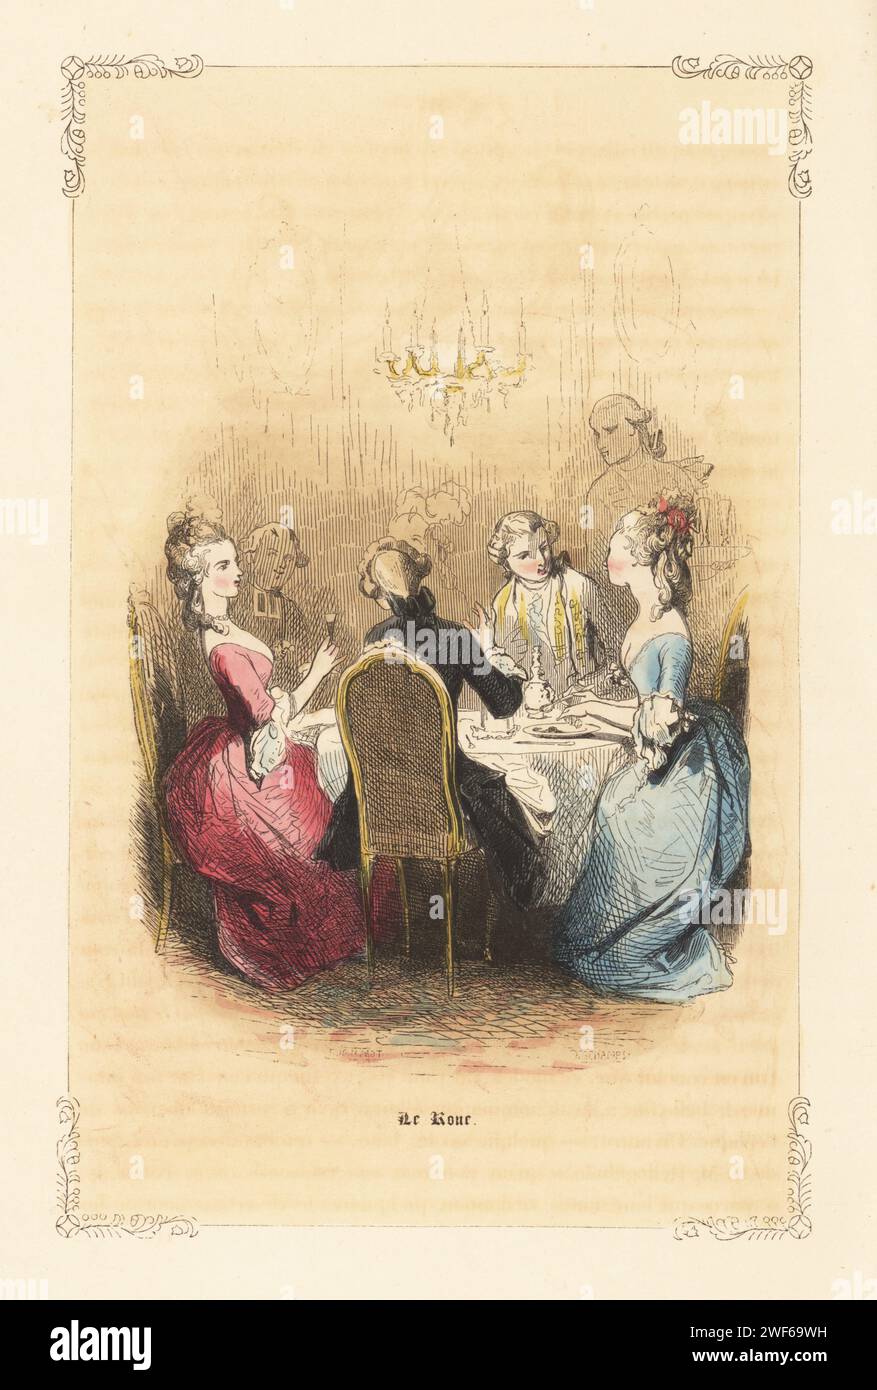 A libertine at dinner with two ladies, France, 18th century. The rake in powdered wig with pigtail tied in a ribbon, black coat, dining with beauties under a chandelier. Famous roues include the 3rd Duke of Richelieu. Le Roue. Handcoloured steel engraving by Deschamps after an illustration by Tony Johannot from Augustin Challamel's Autrefois ou Le Bon Vieux Temps, Types de 18e Siecle, Challamel et Cie, 1842. Stock Photo